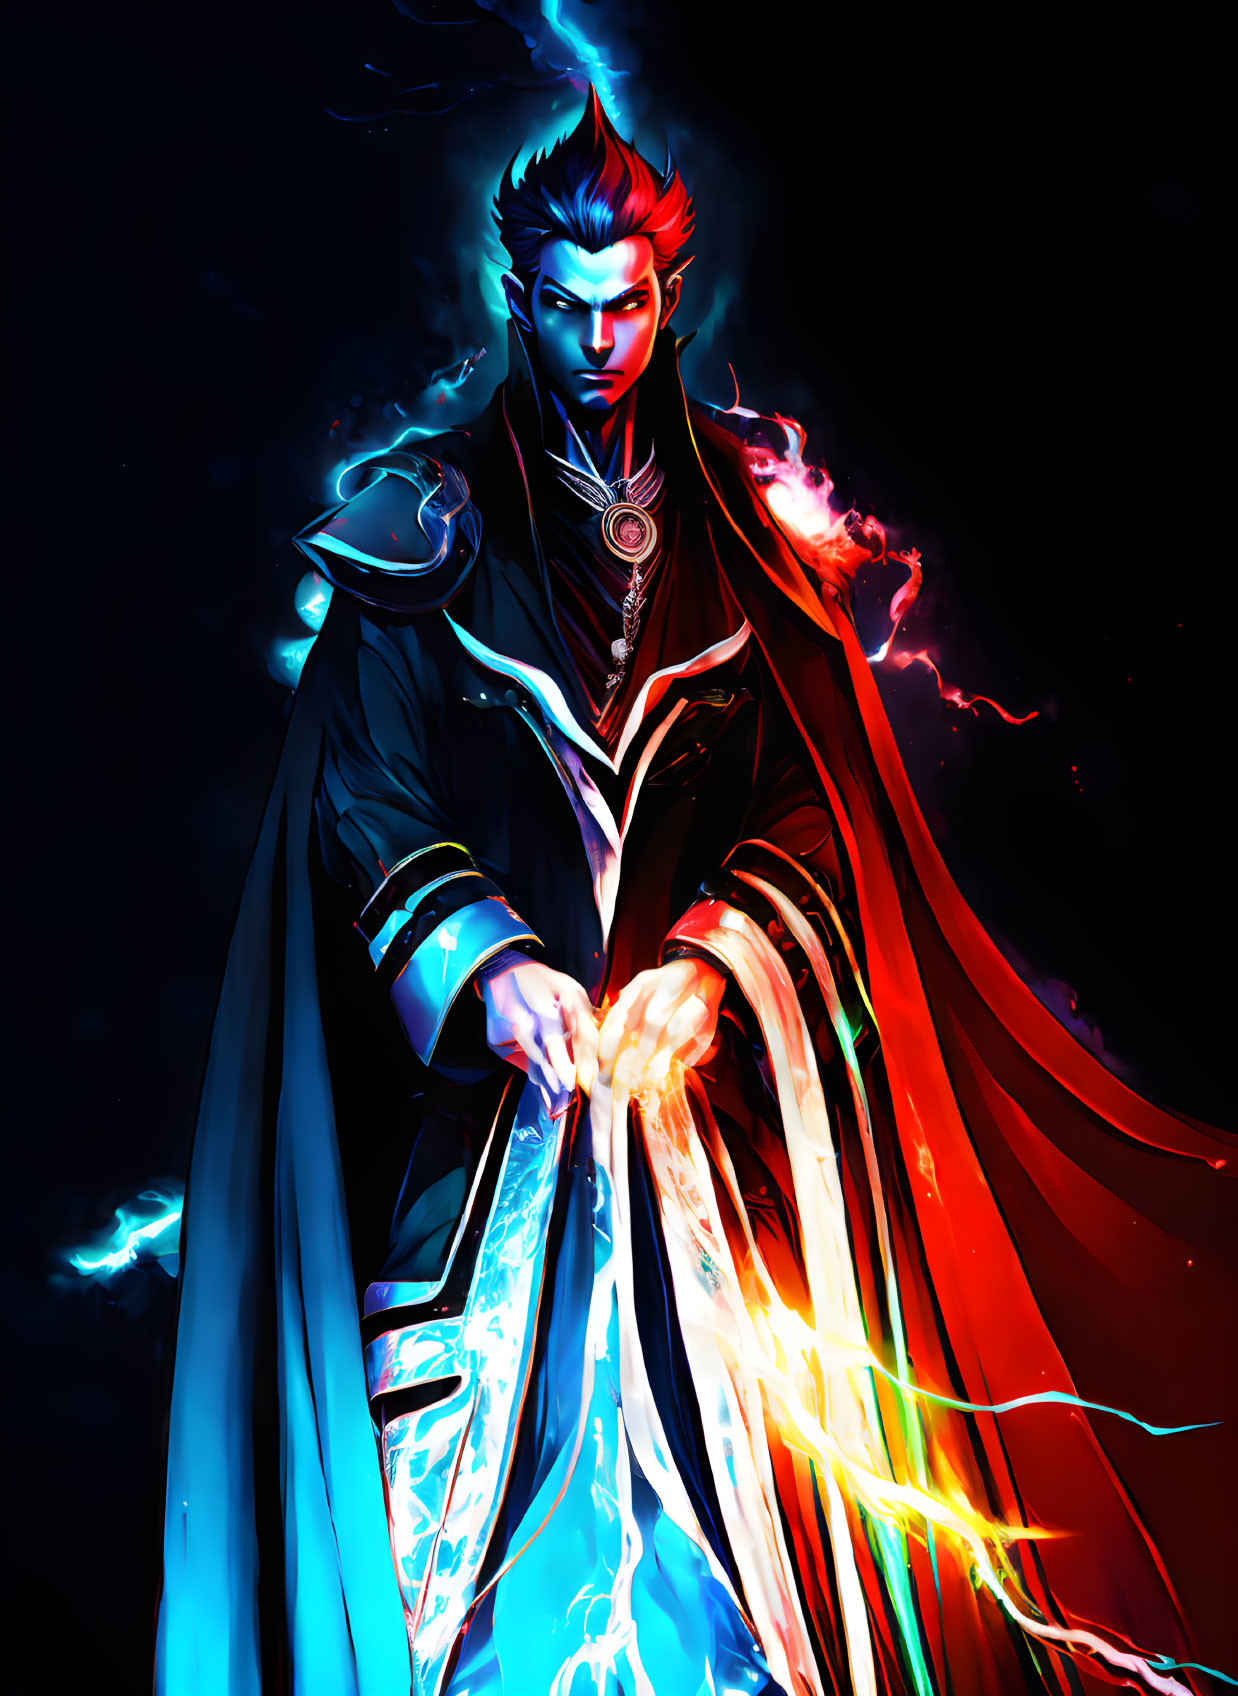 Dynamic character in dark robe with fiery and icy powers